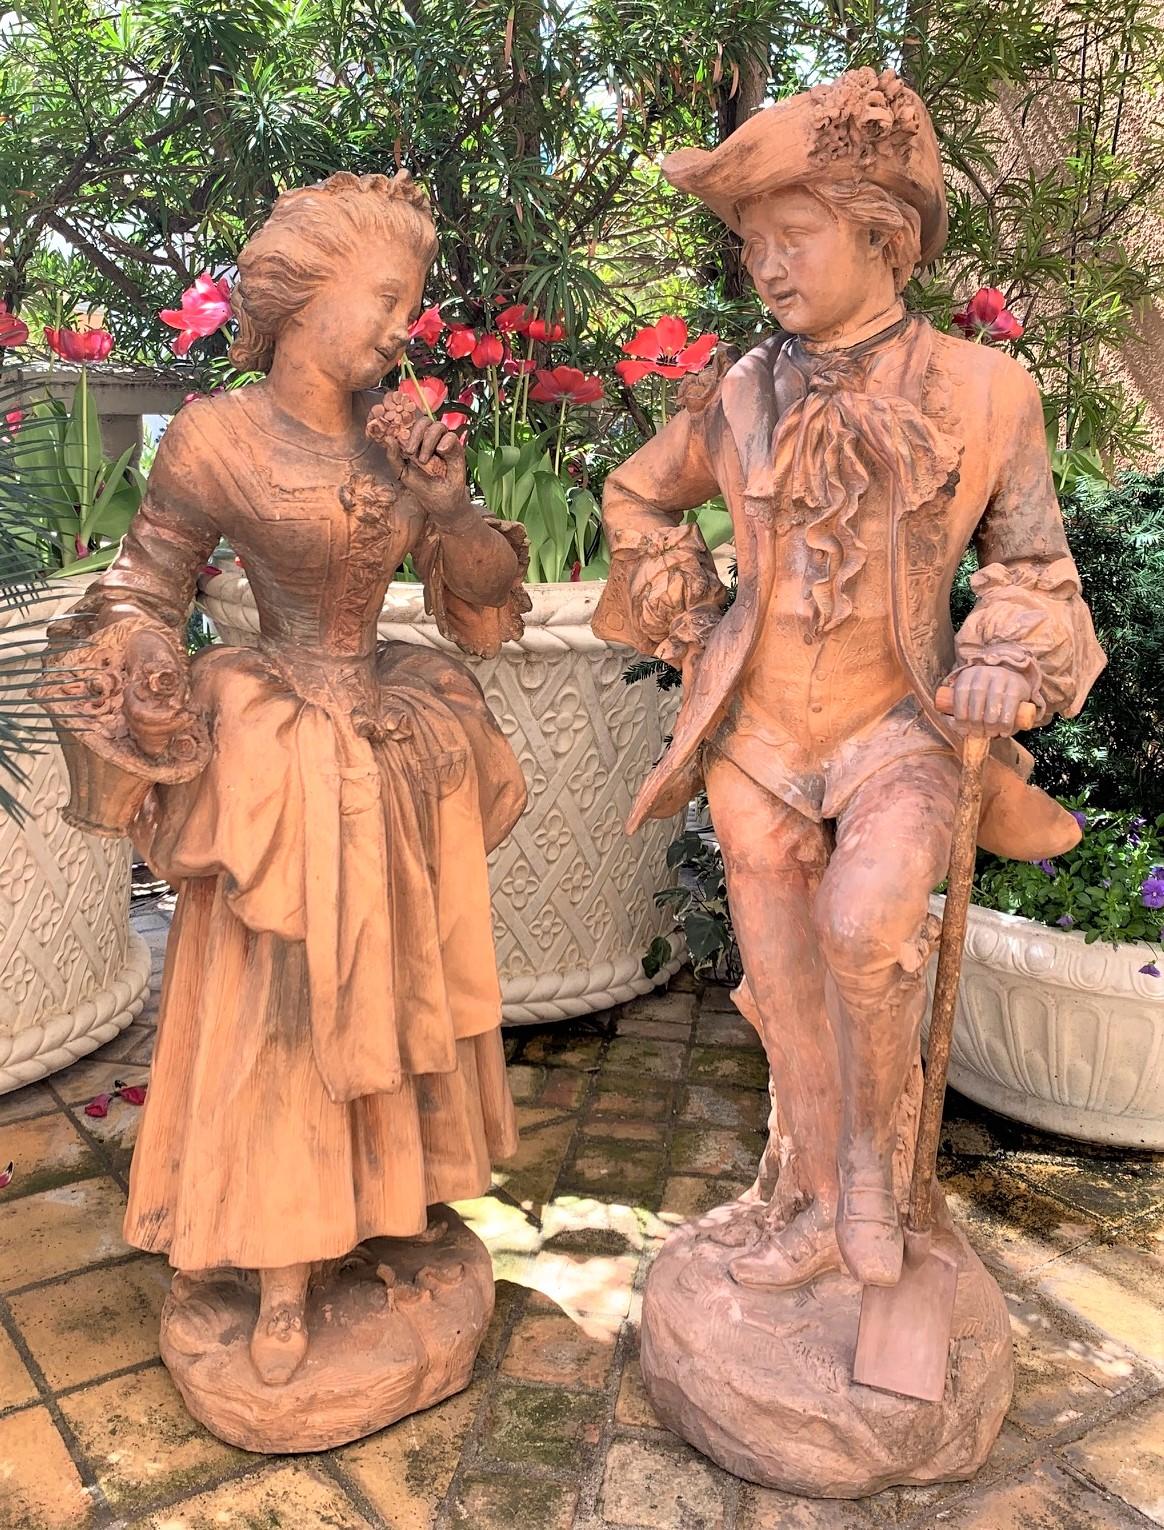 Important pair of 18th century French terracotta sculptures of a young lady and gent dressed in formal attire of the period. The lady holds a basket of flowers, the gent with a digging spade. Phenomenal detail overall with life-like expression.